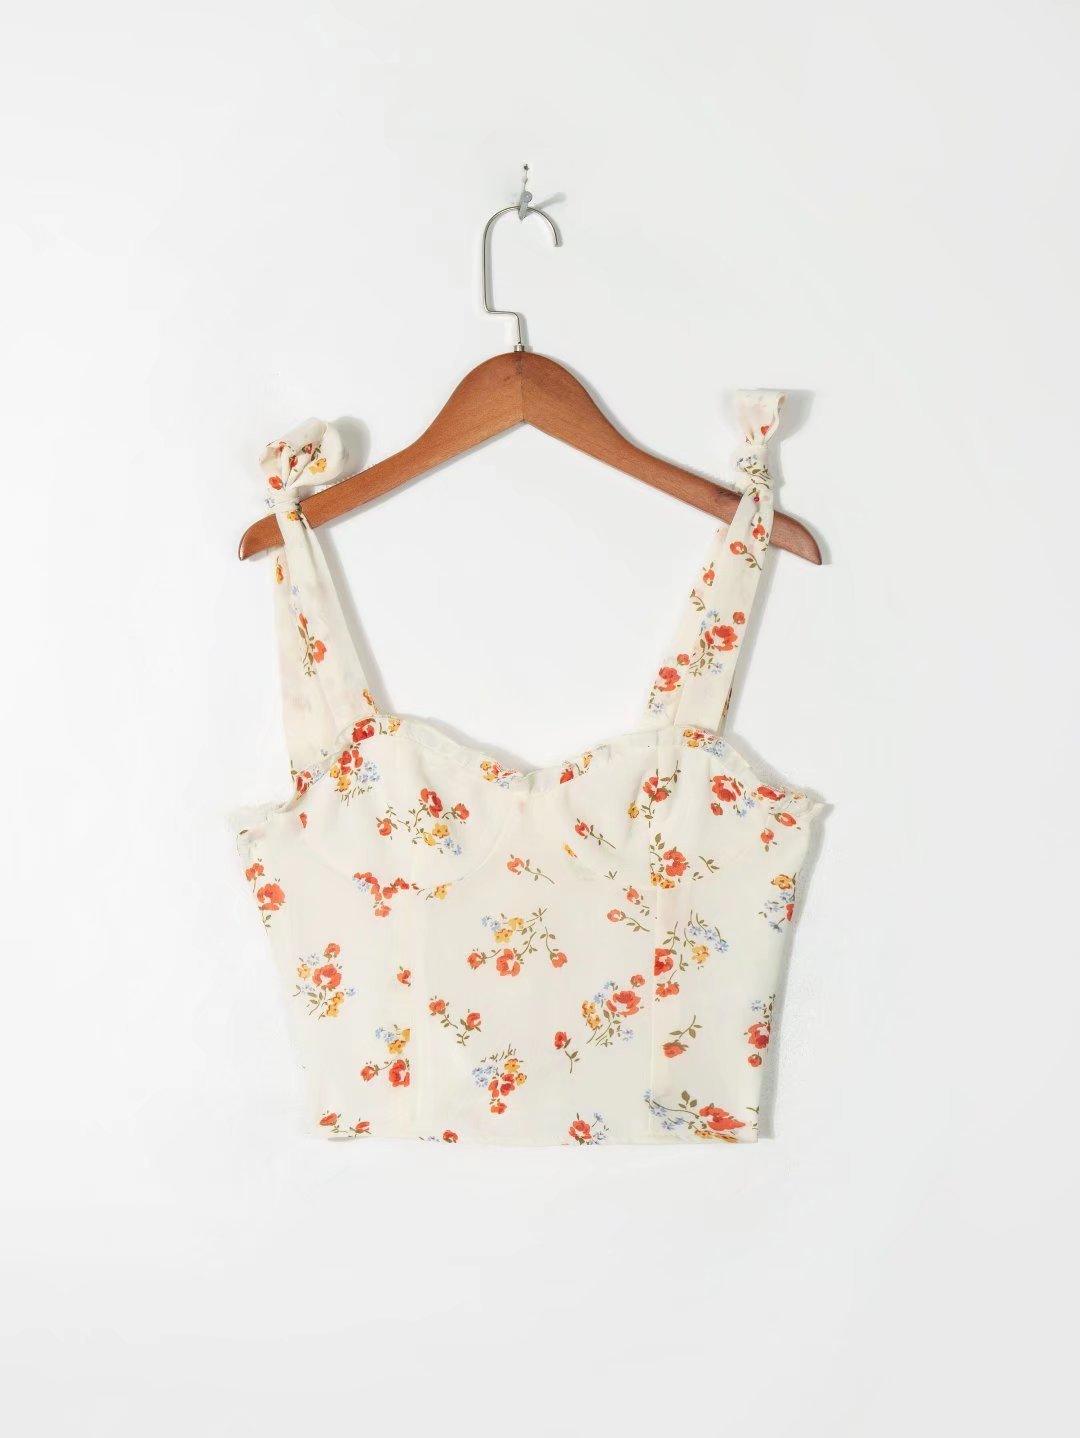 Strap Slim-Fit Printed Lace-up Camisole Top - Tamra.Shop.Social